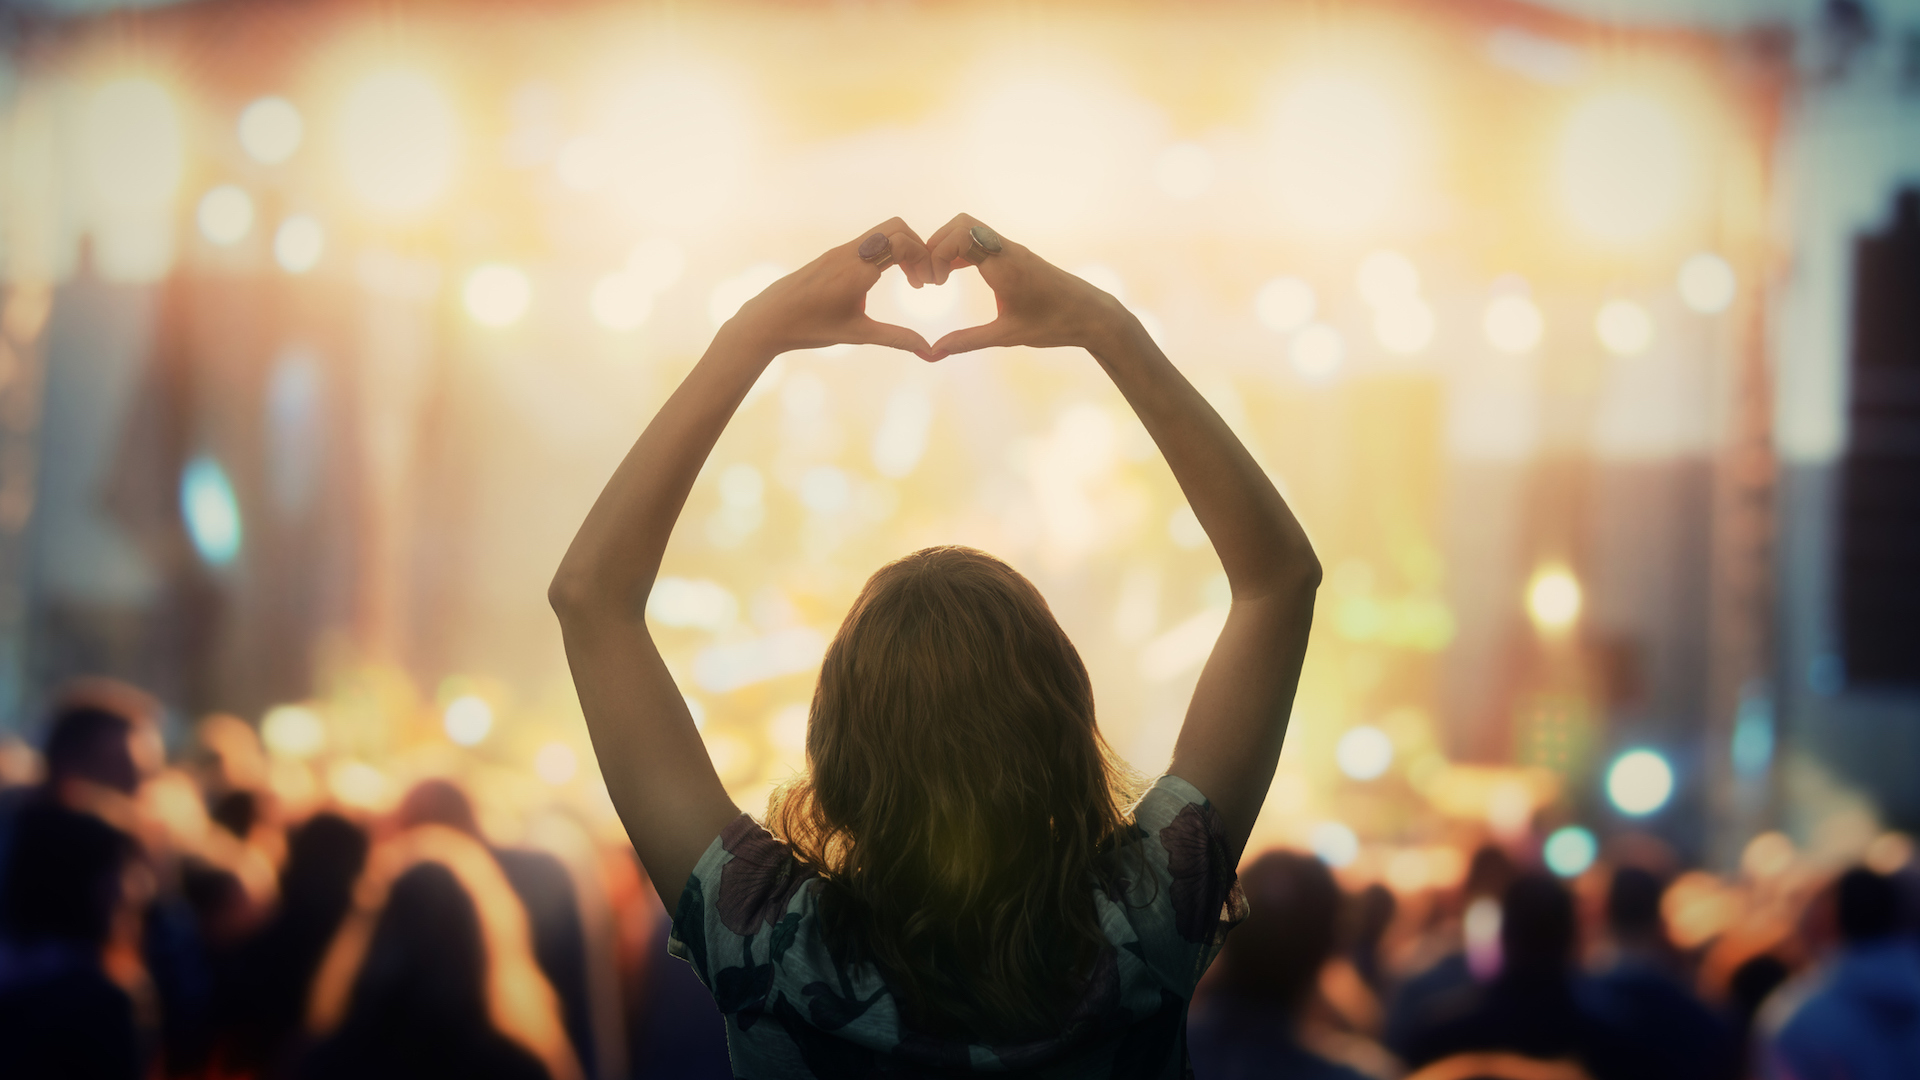 A person making a heart sign at an outdoor concert